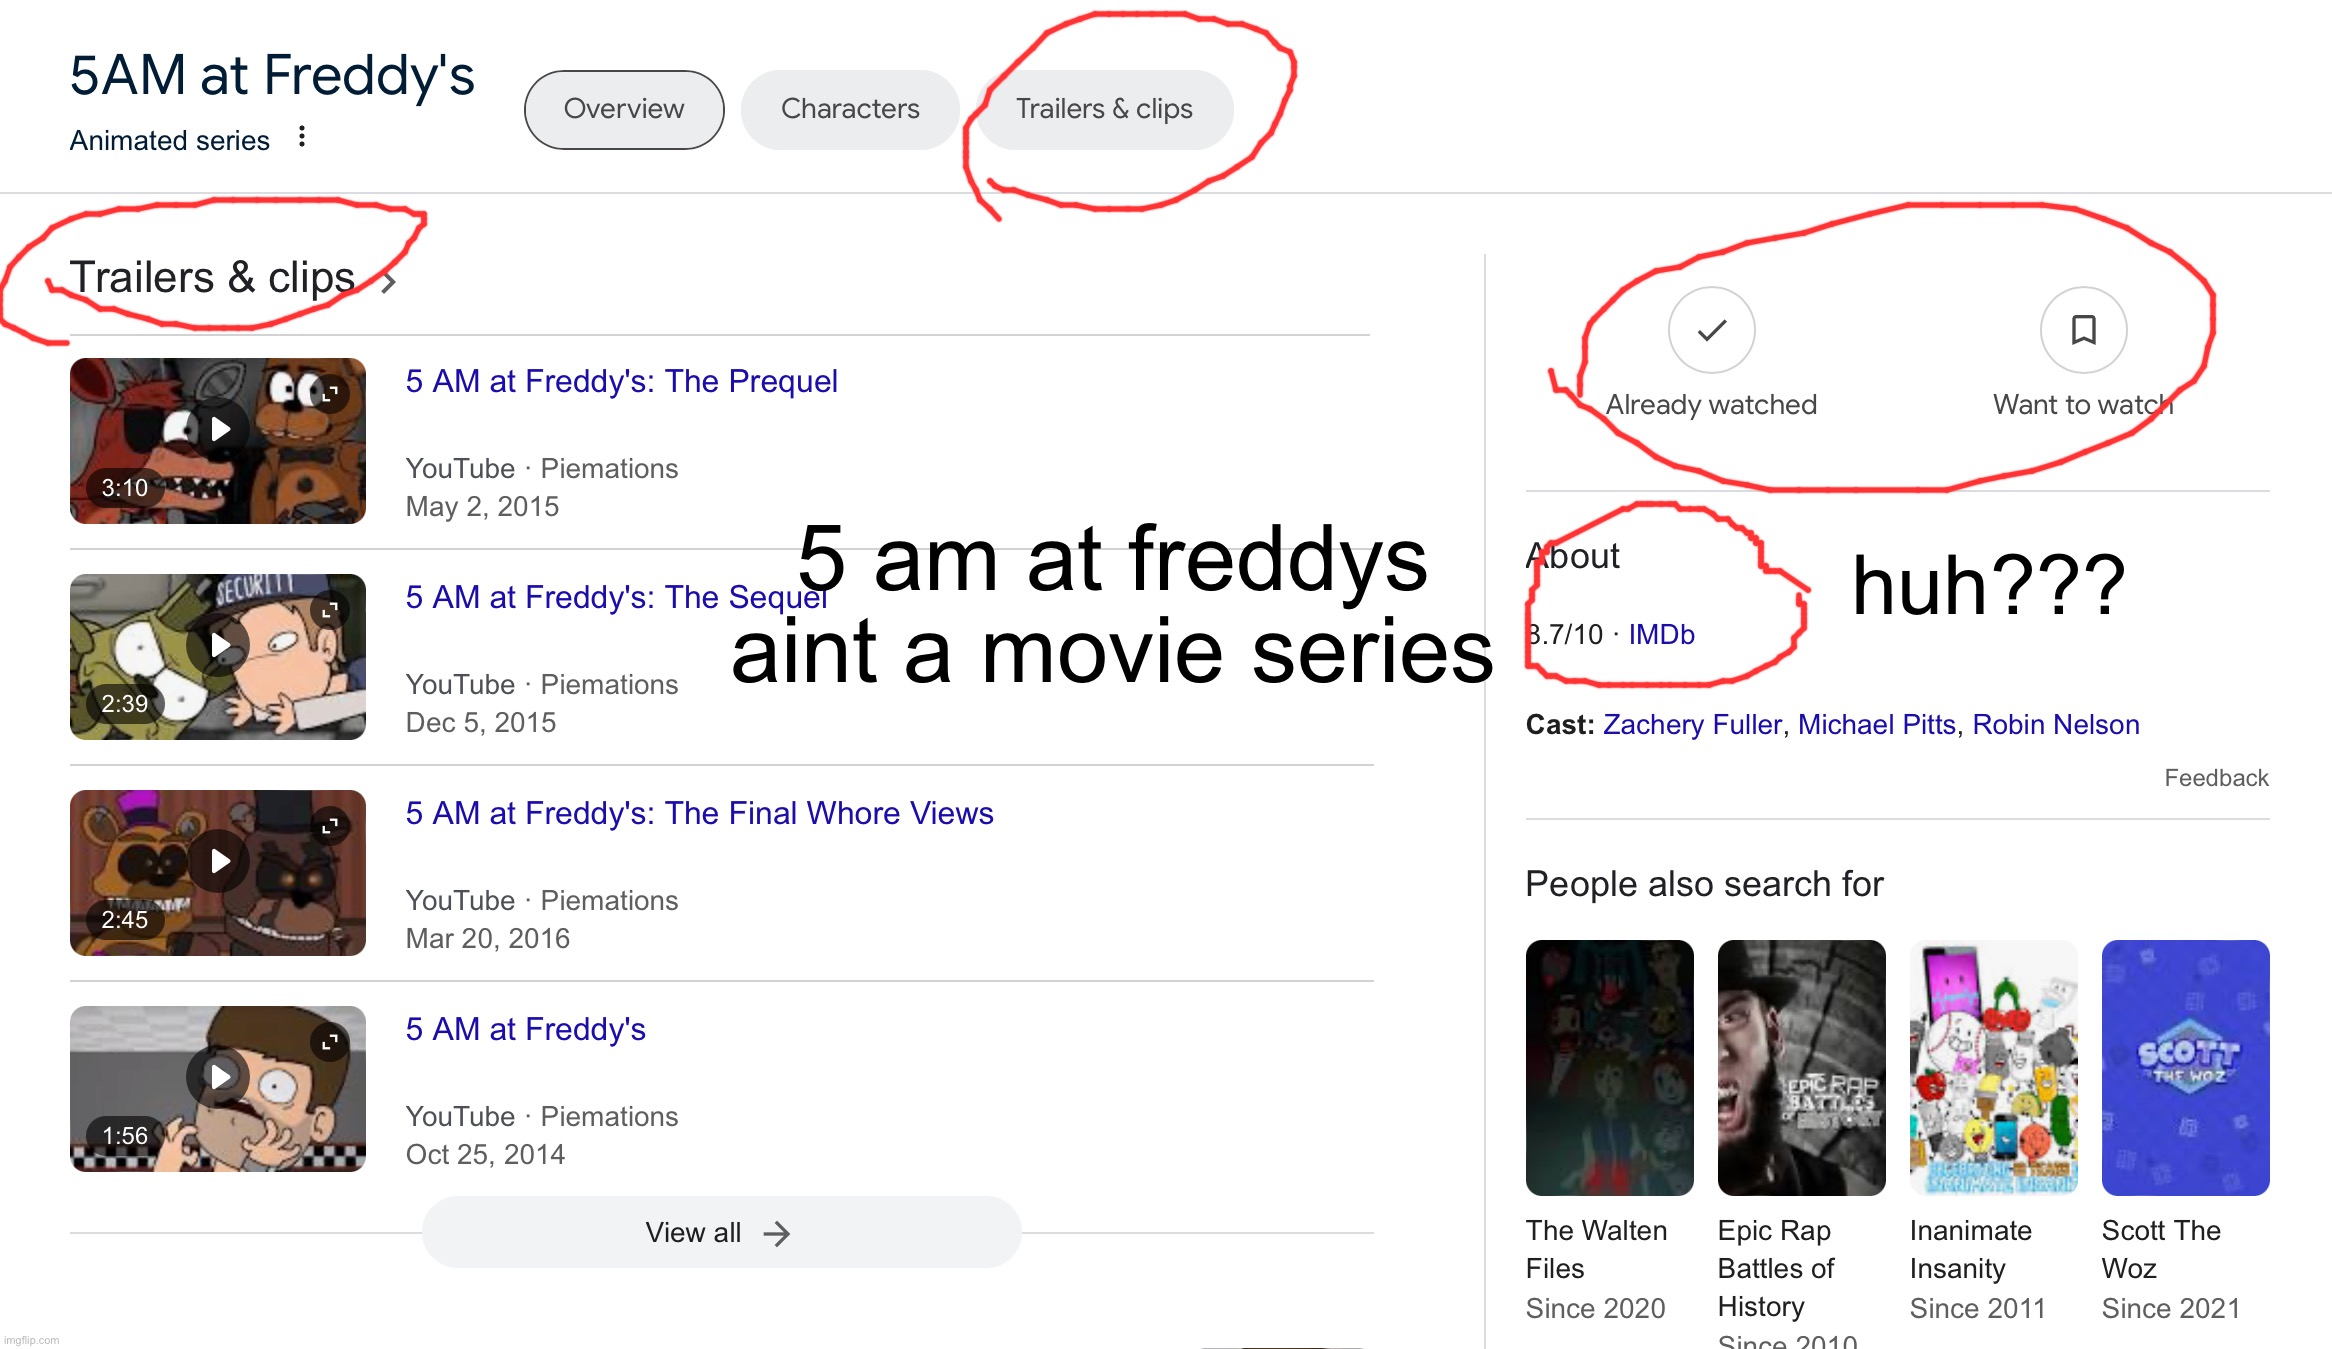 5 am at freddys aint a movie series; huh??? | image tagged in memes | made w/ Imgflip meme maker